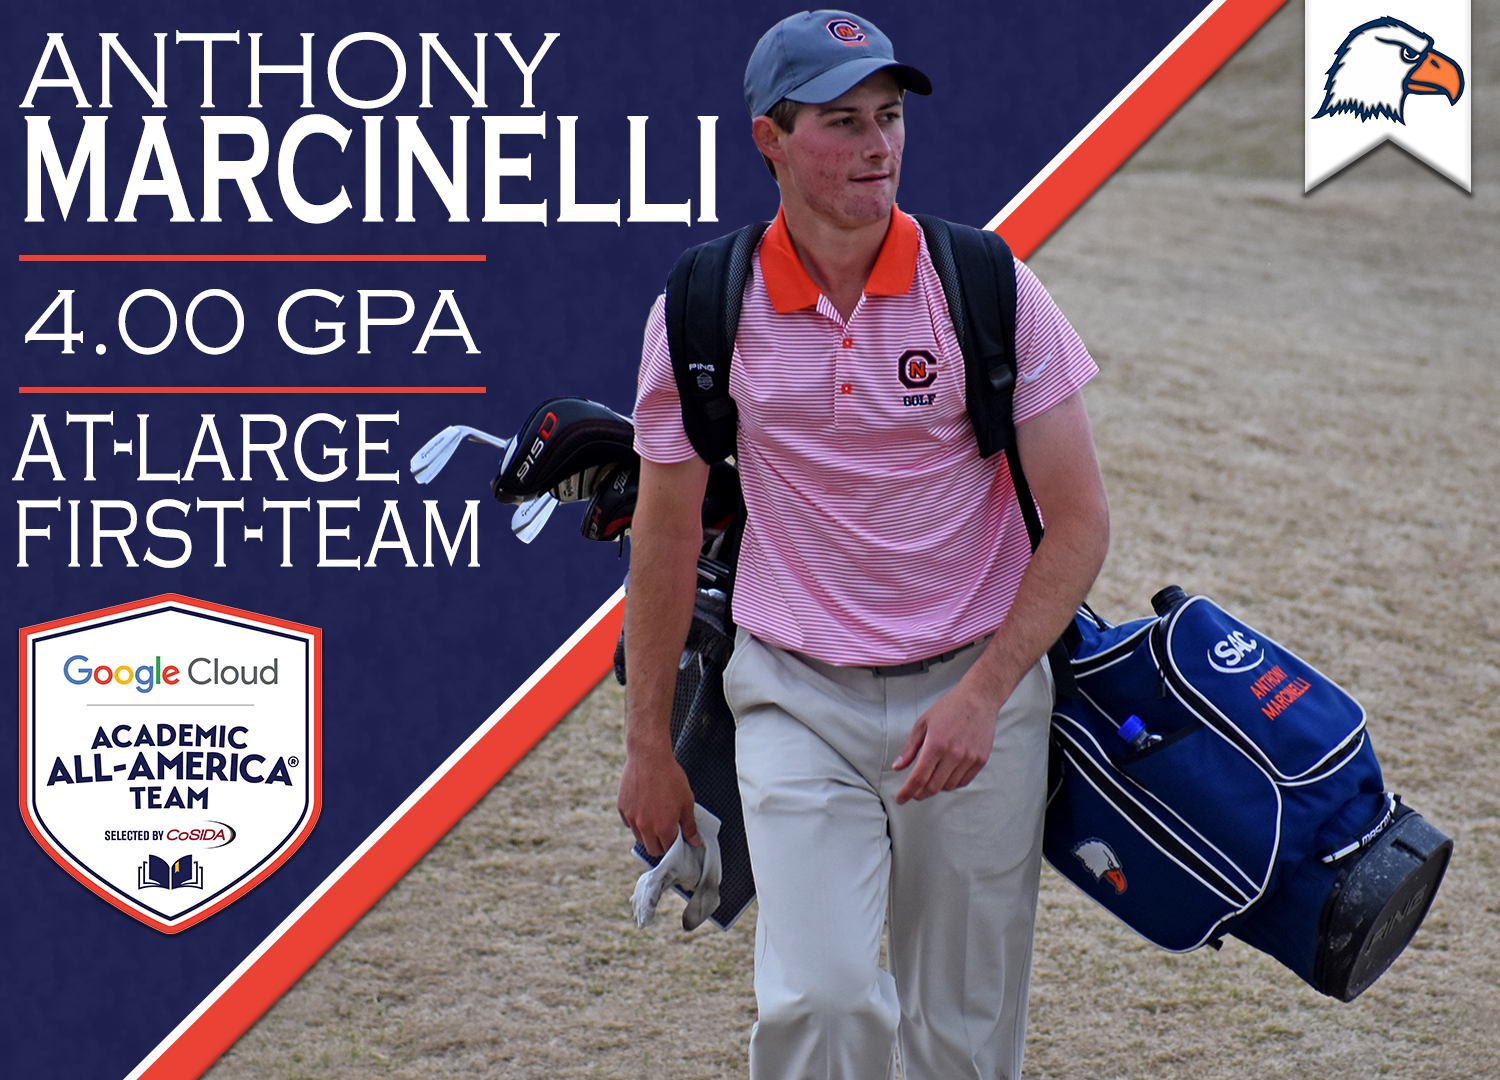 Marcinelli lauded first team Academic All-American